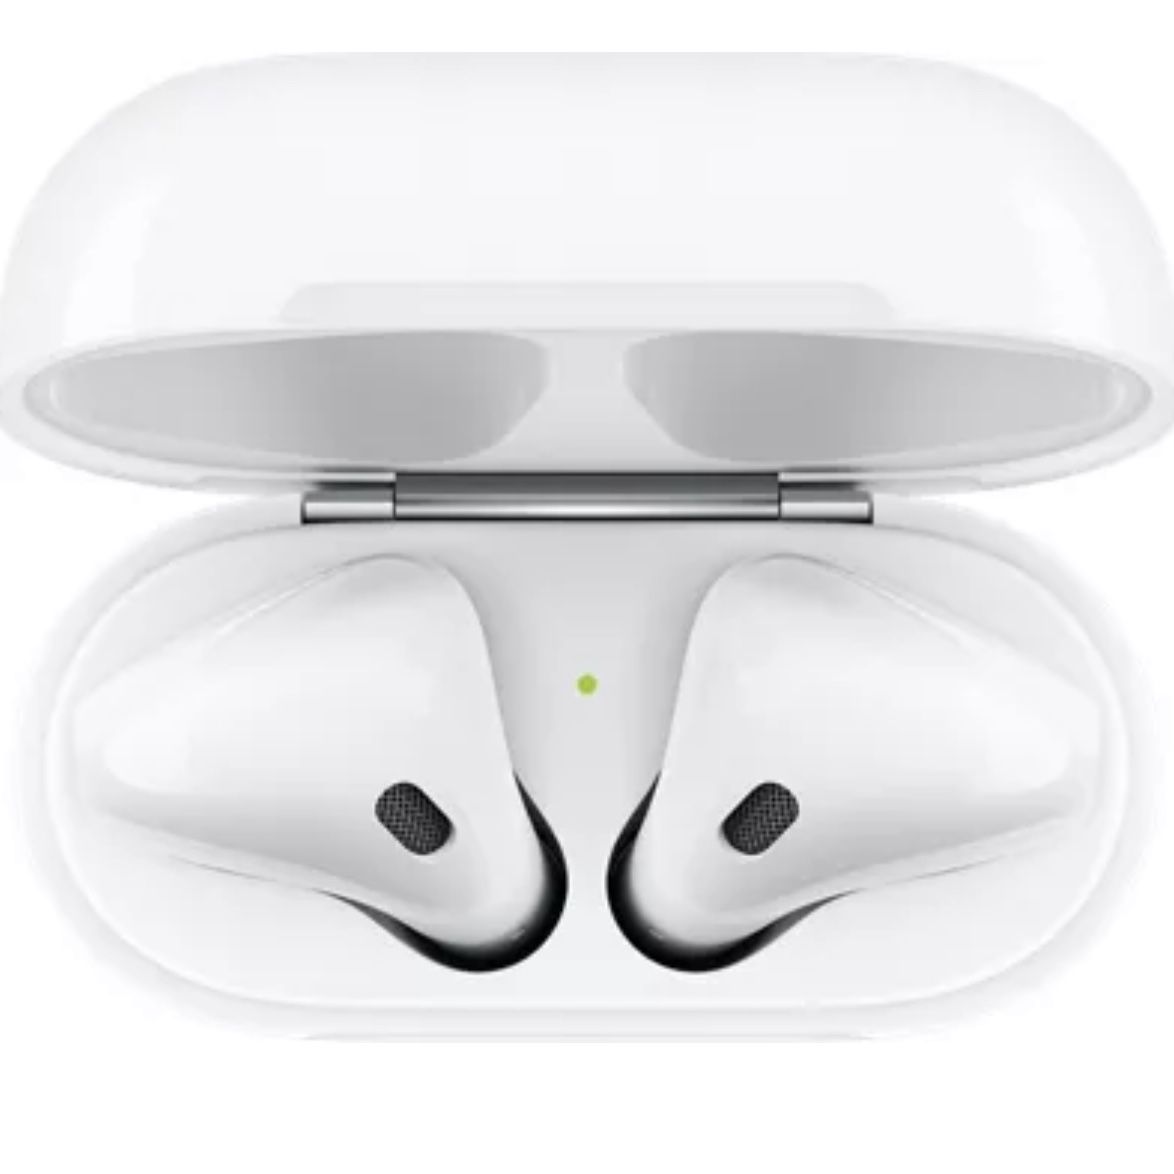 Apple Airpods Pro Generation 2 with Magsafe Charging Case, NEW! 